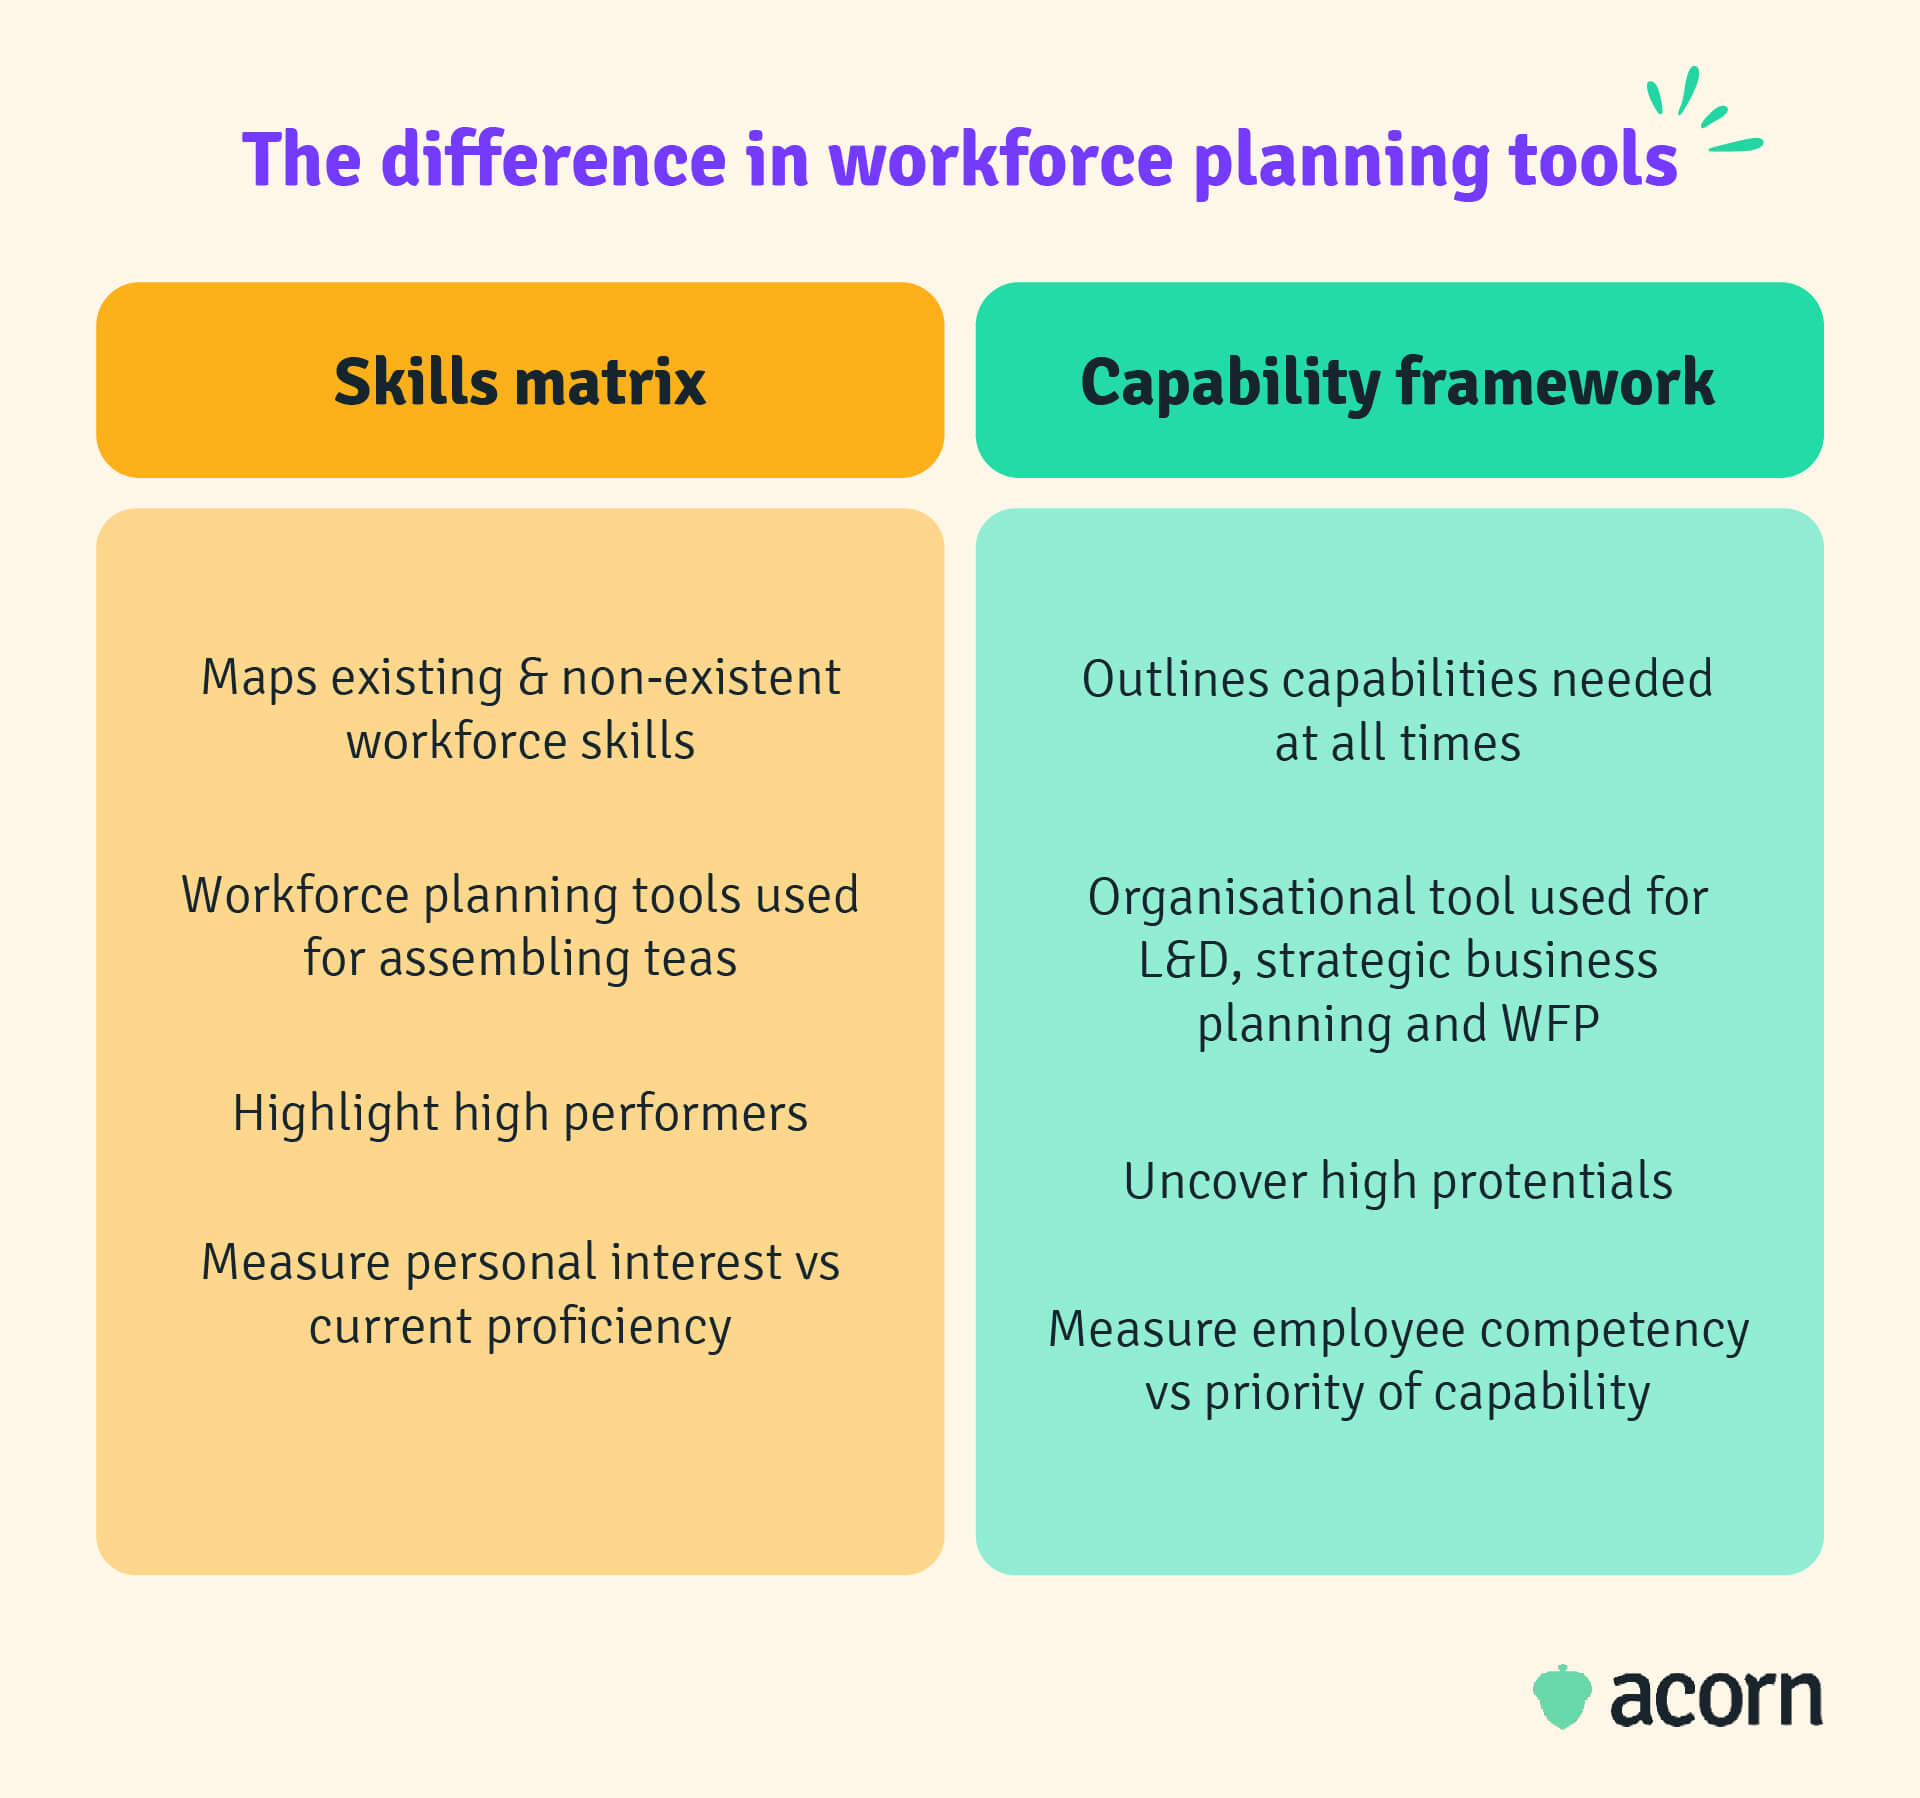 Table showing the key points of difference in utilisation between the skills matrix and capability framework